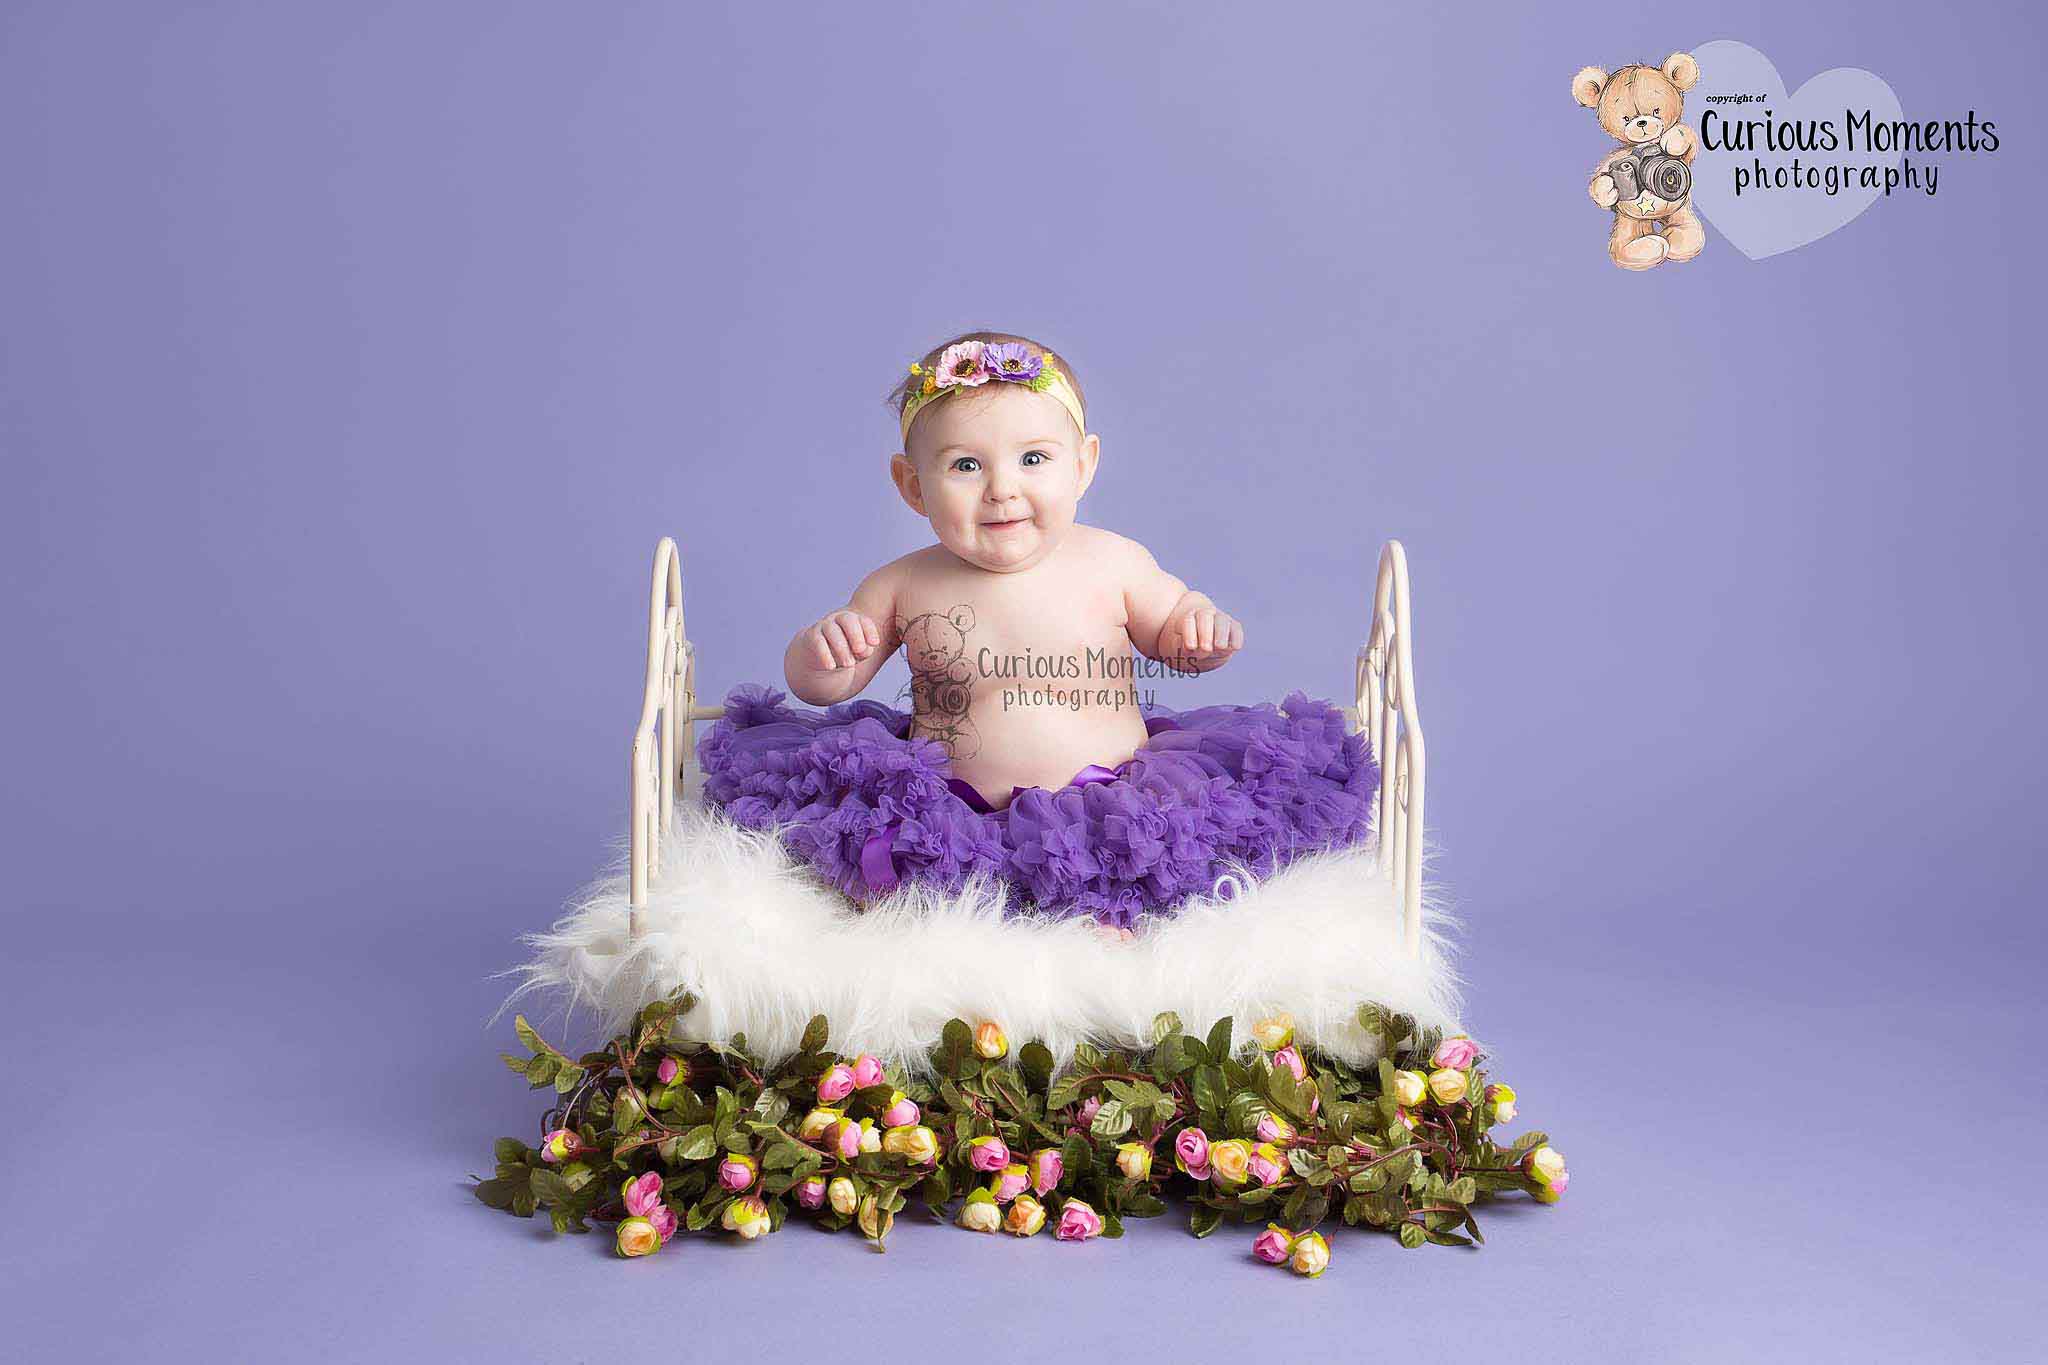 Happy baby firl wearing a purple tutu sat on a metal bed surrounded by flowers on a purple background during her photo shoot with pembrokeshire baby photographer